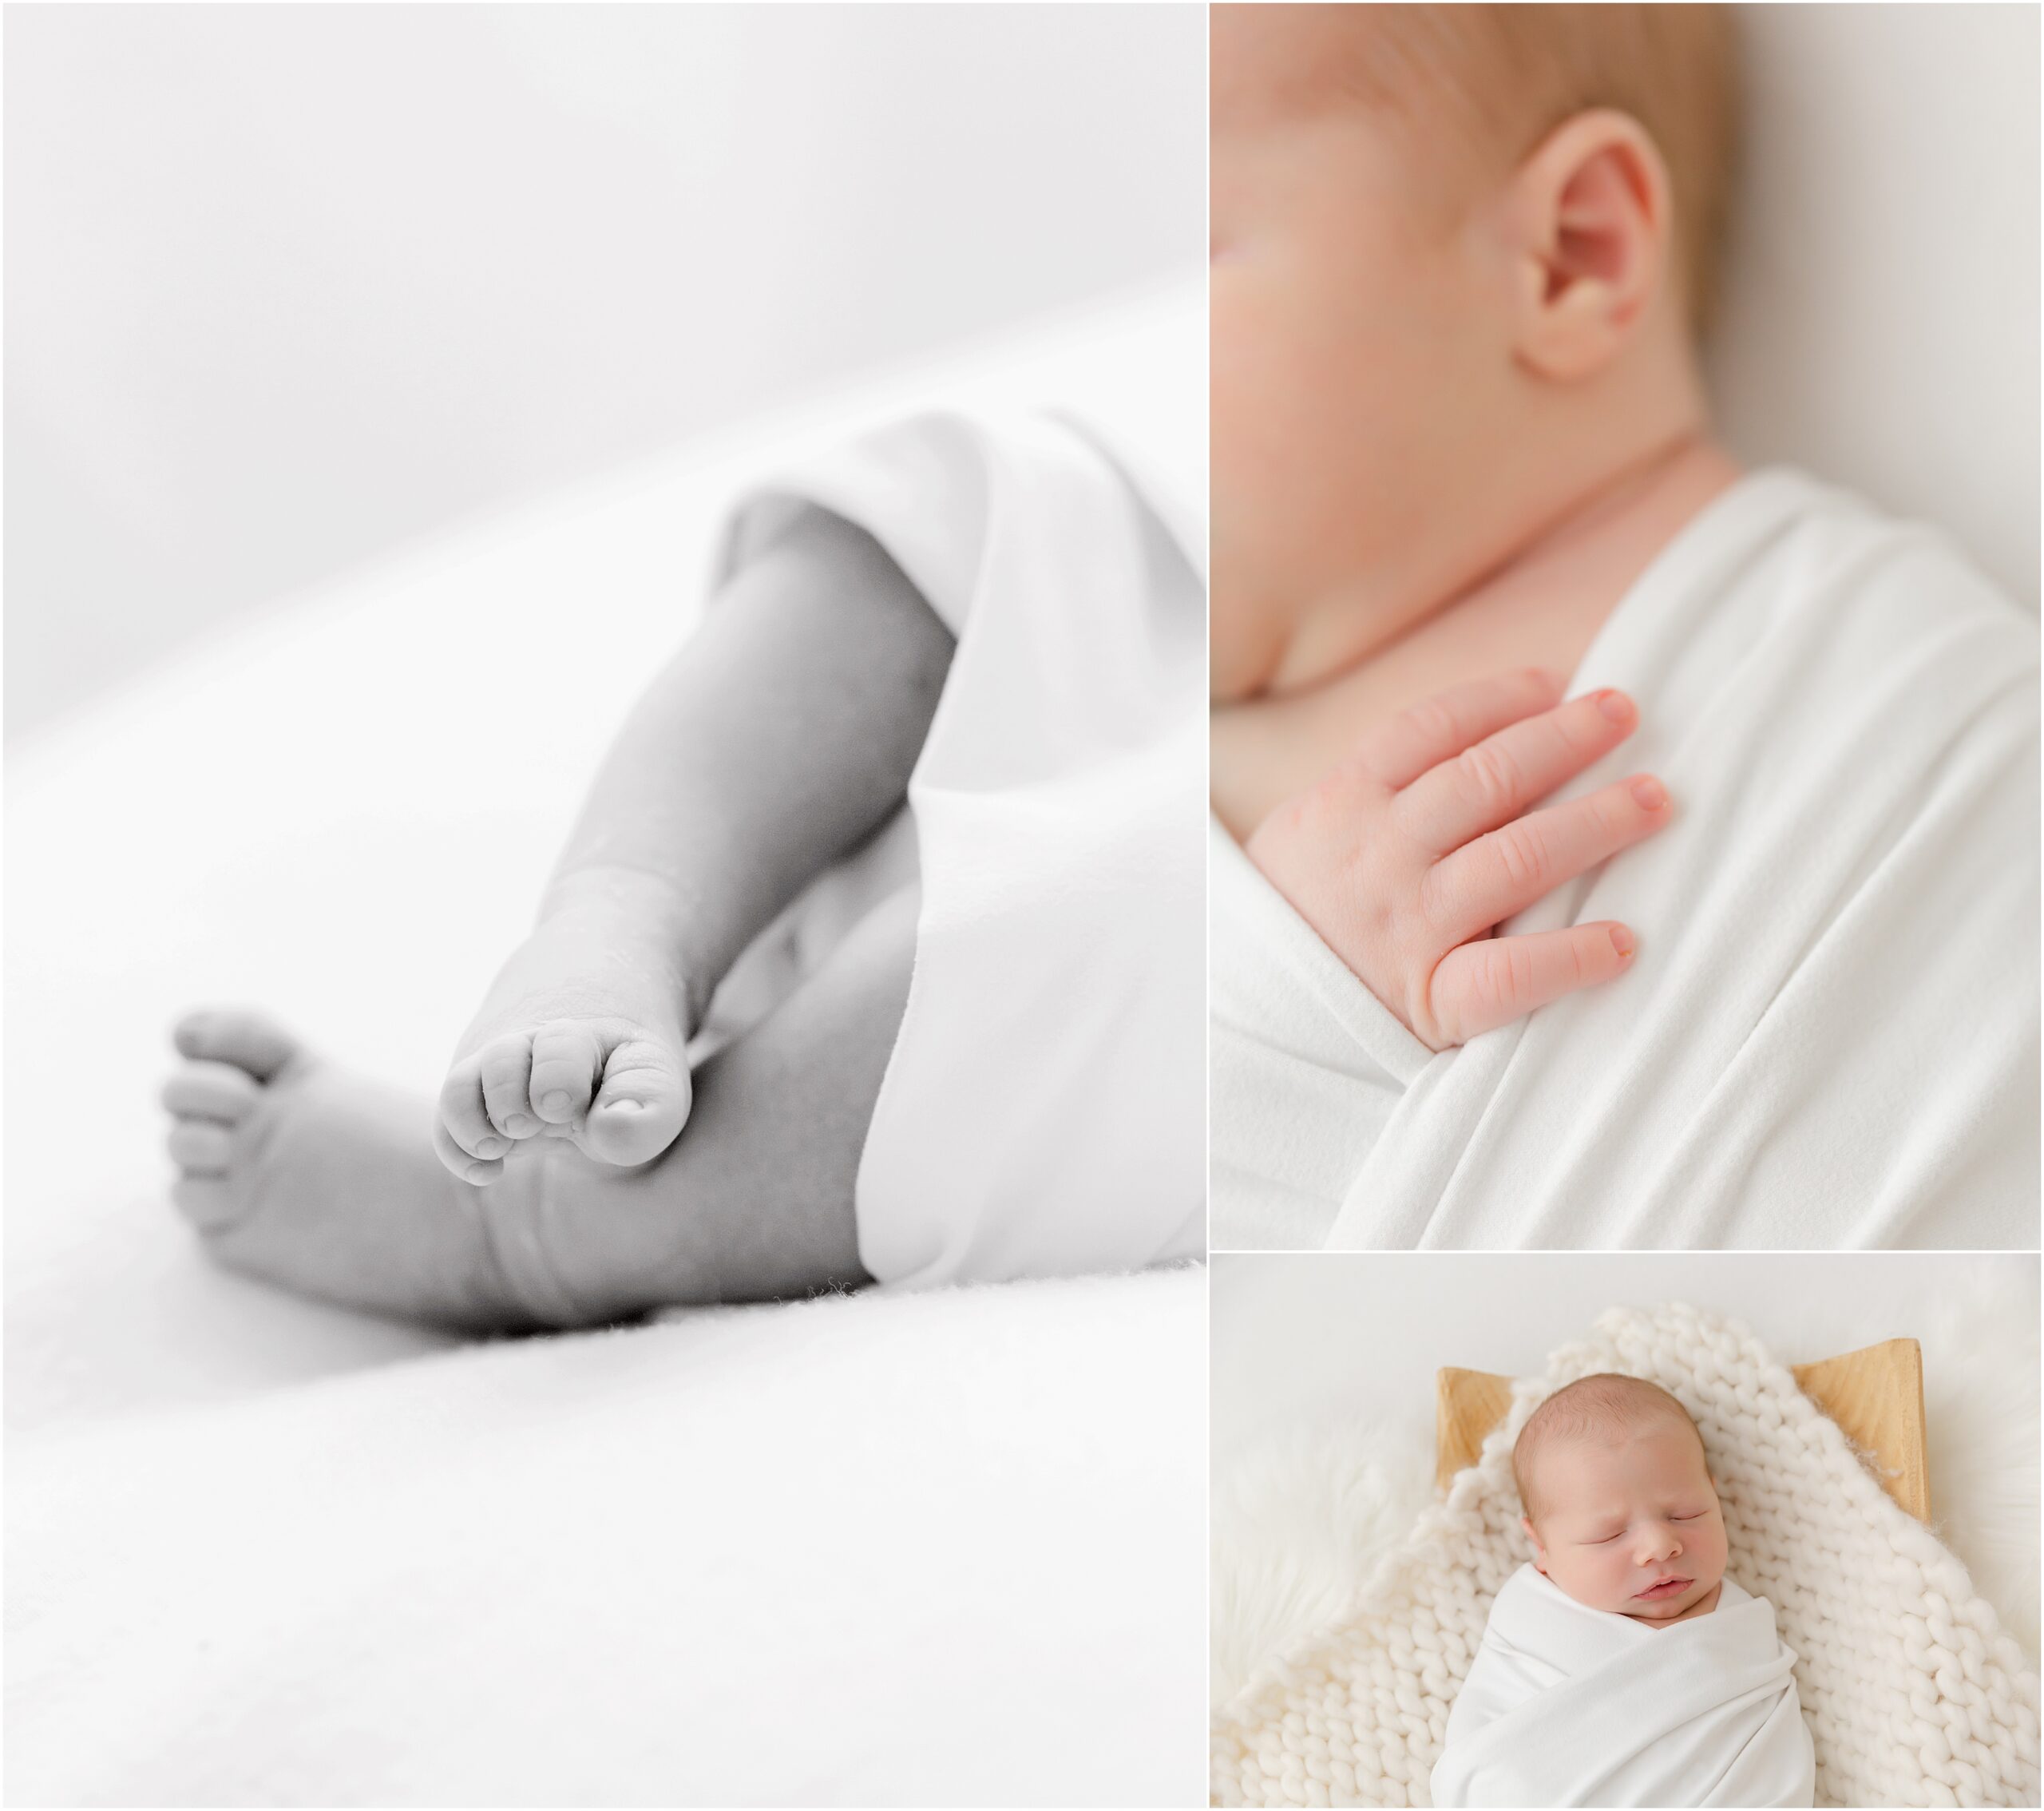 Close up photos of a newborn baby's hand and feet